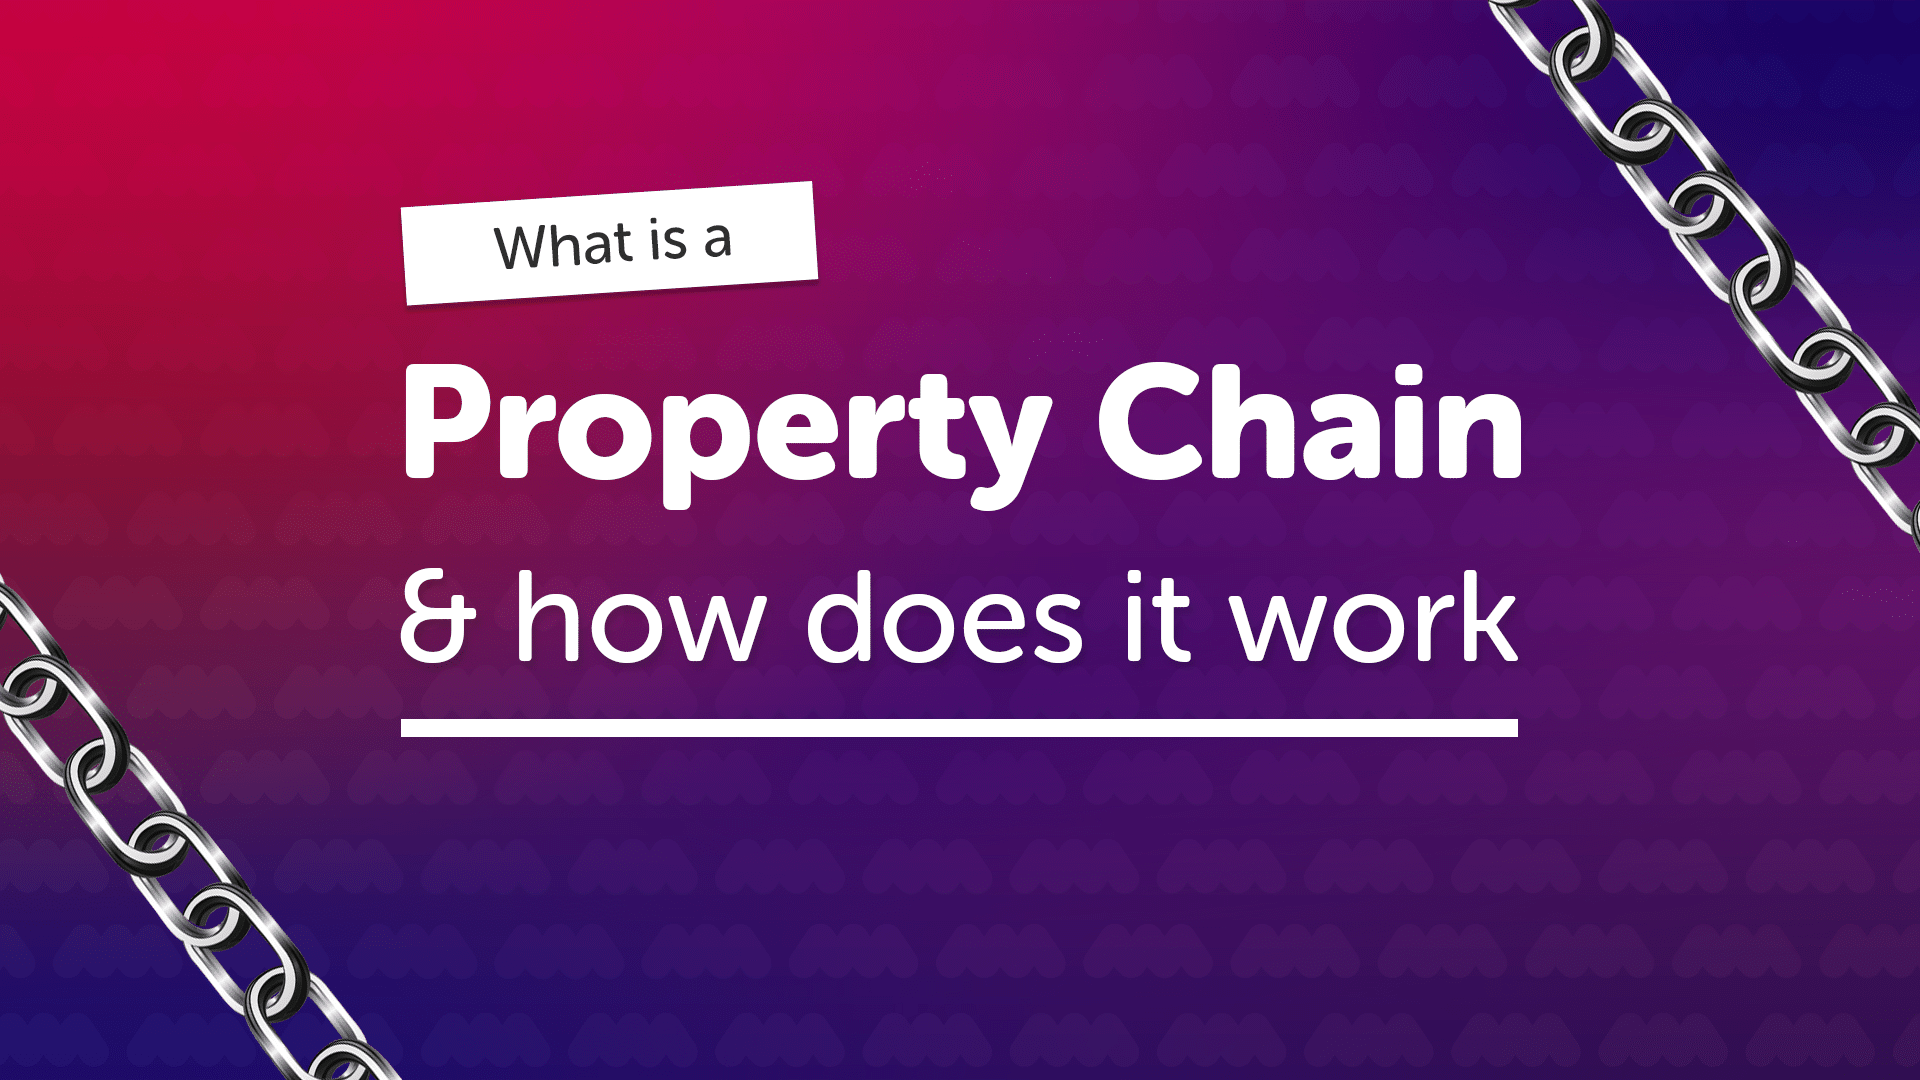 What is a Property Chain in Sheffield